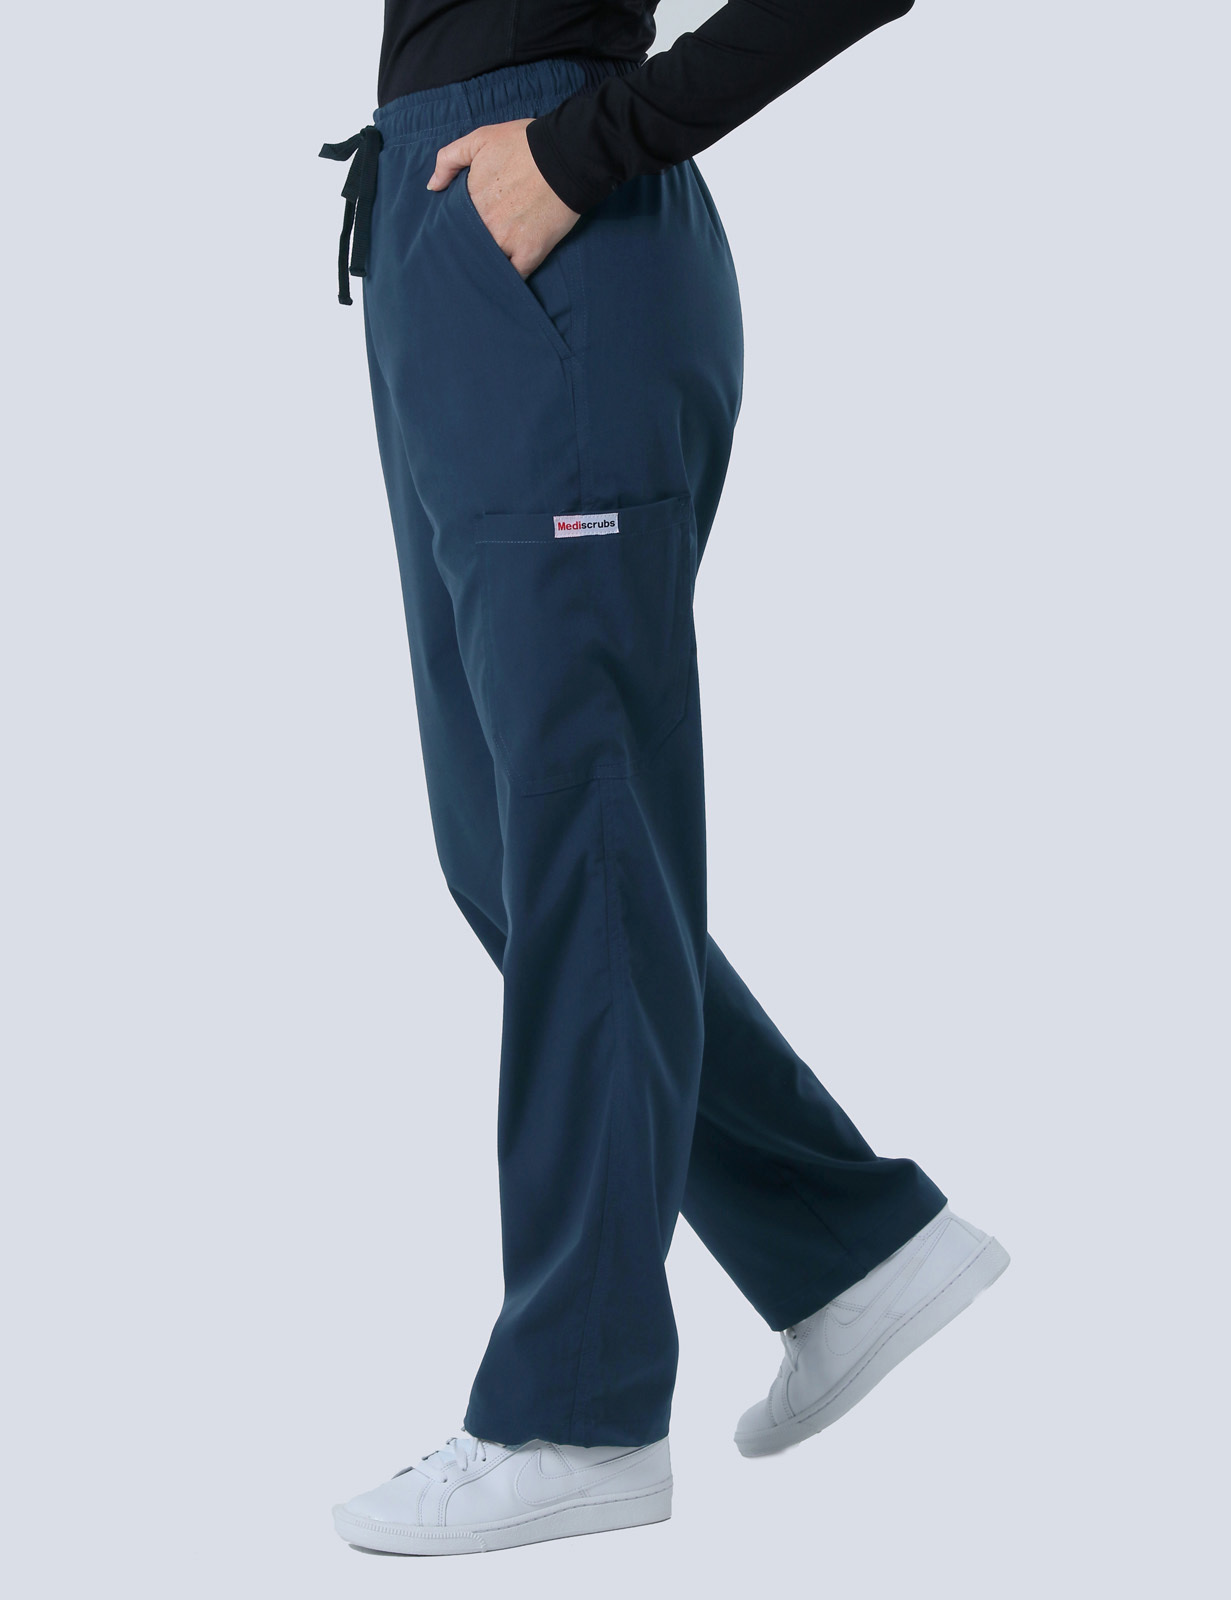 RBWH Neurology Out Patient Department -  Neurophysiology Scientist Uniform Bundle (Women's Fit Spandex Top and Cargo Pants In Navy incl Logos)